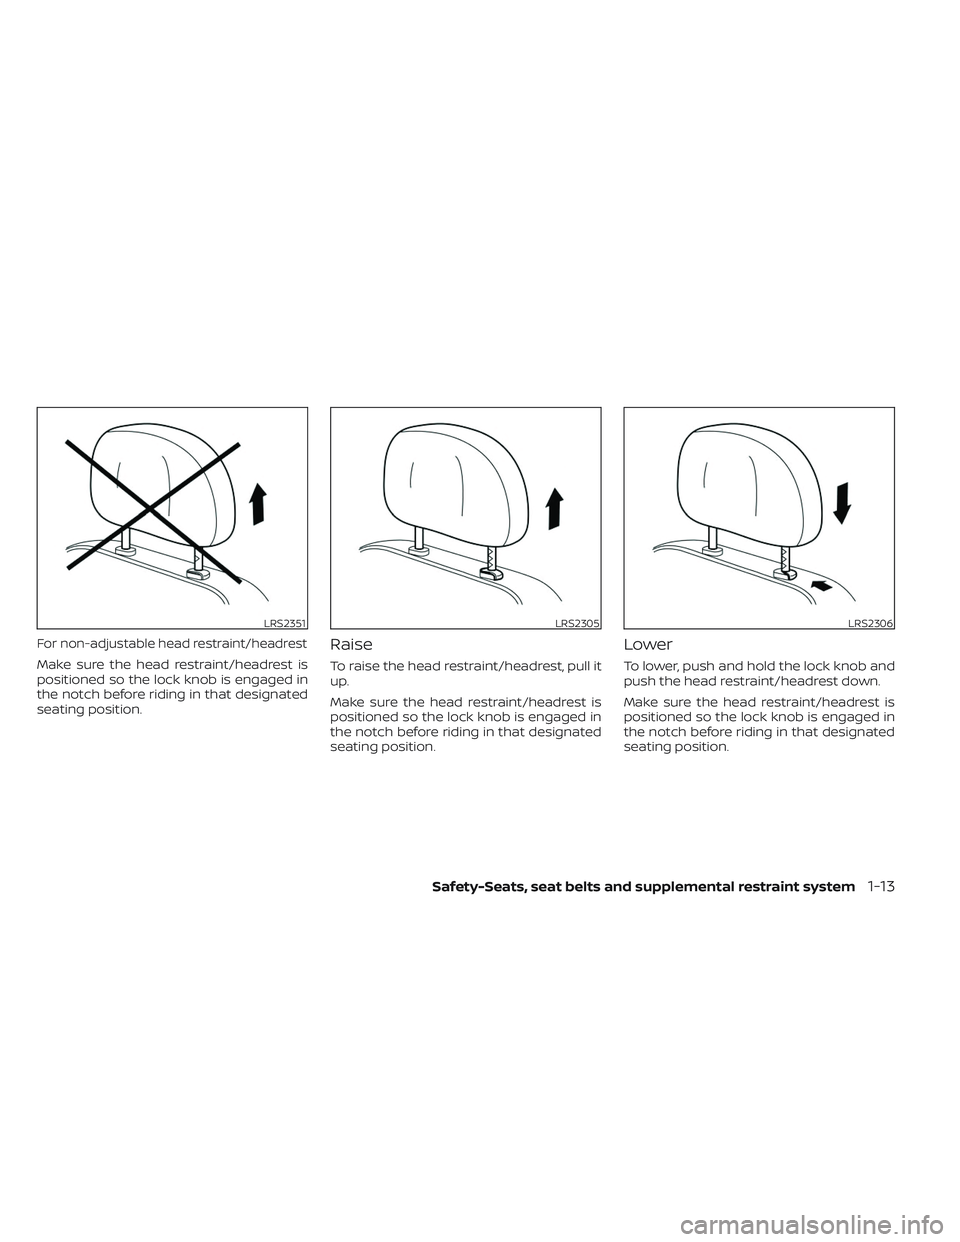 NISSAN FRONTIER 2023  Owners Manual For non-adjustable head restraint/headrest
Make sure the head restraint/headrest is
positioned so the lock knob is engaged in
the notch before riding in that designated
seating position.
Raise
To rais